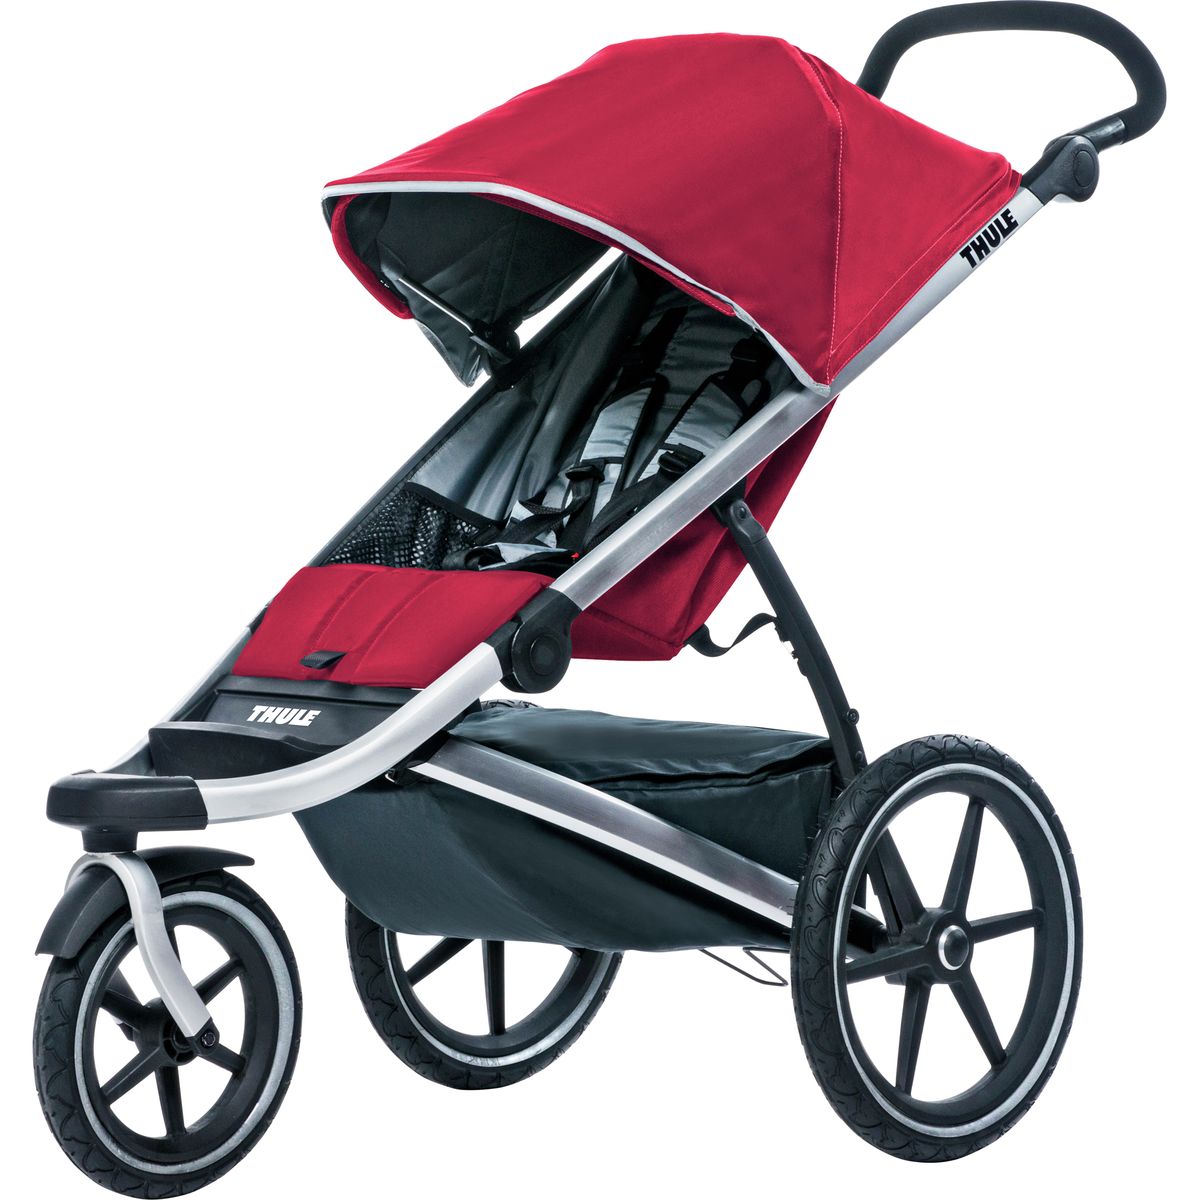 Thule Chariot Urban Glide Stroller Mars, One Size